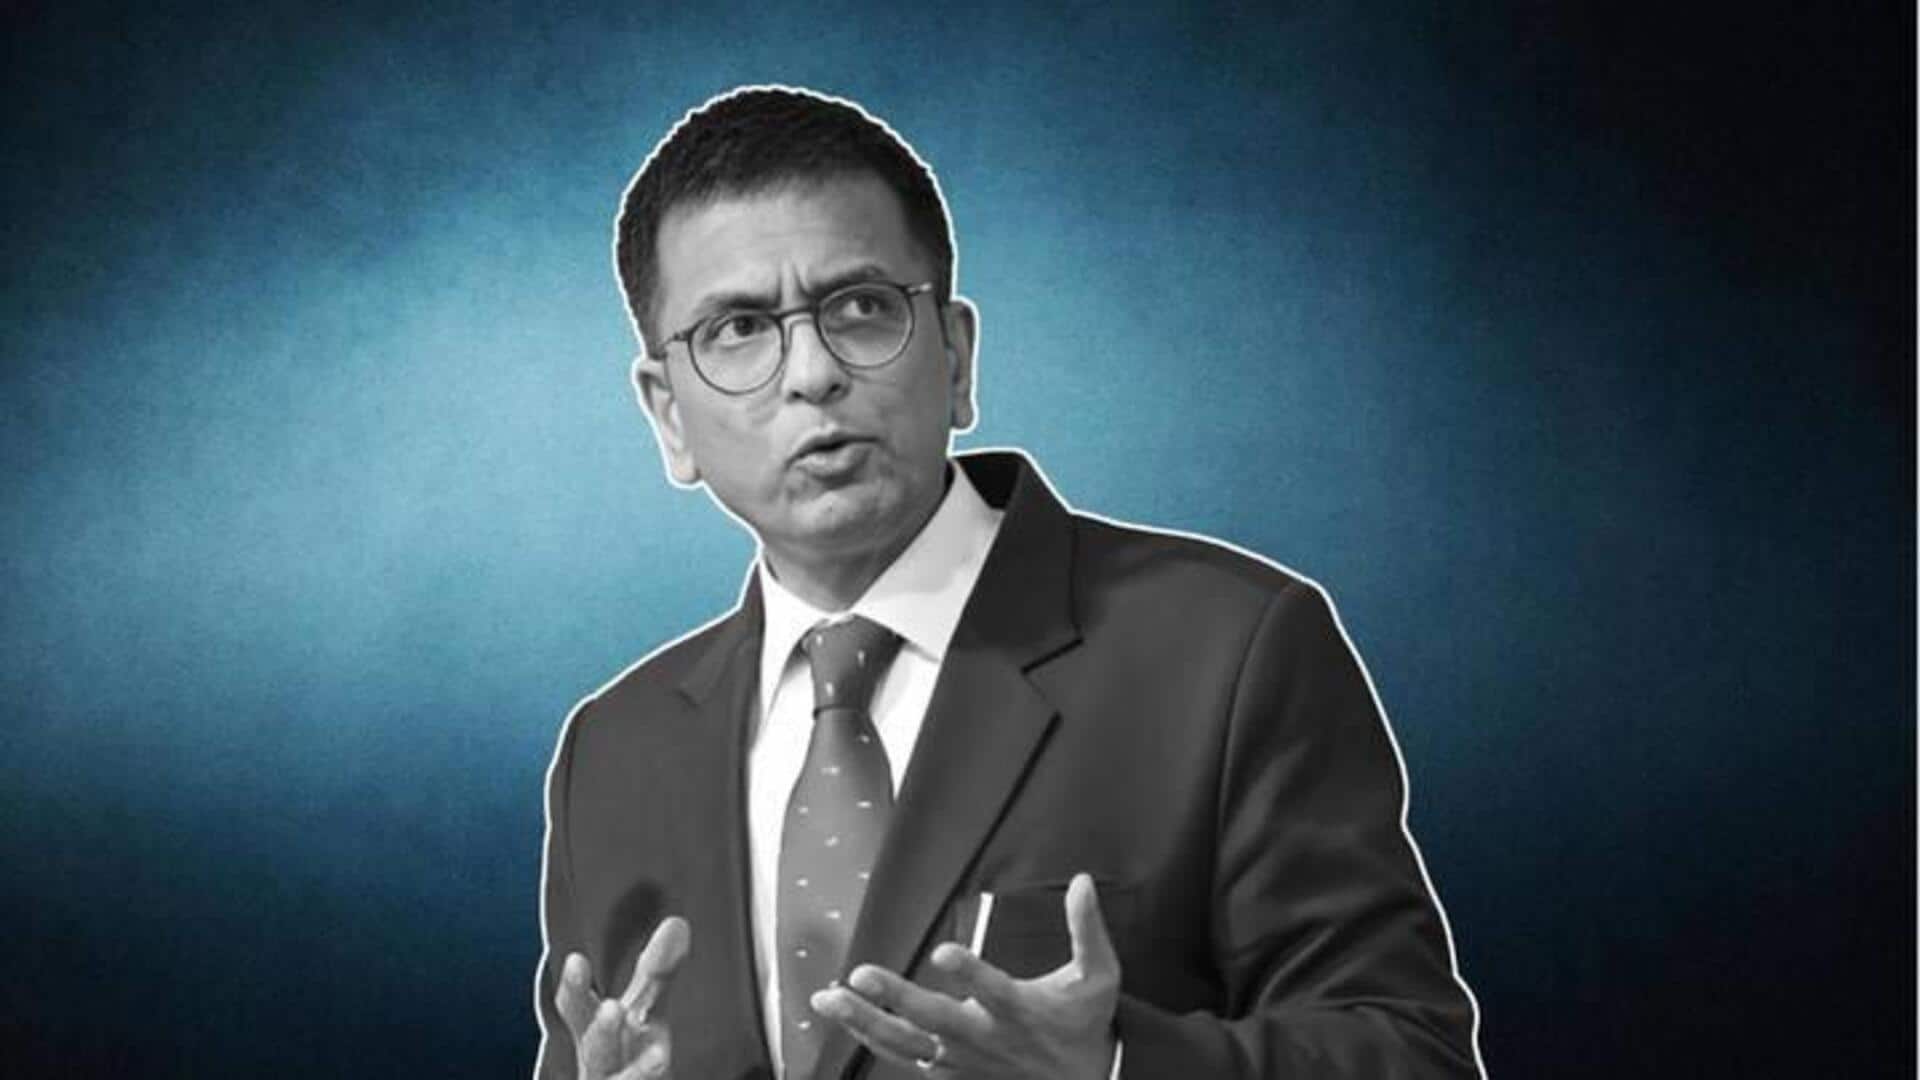 Indian courts prioritize marriage over individual: CJI DY Chandrachud